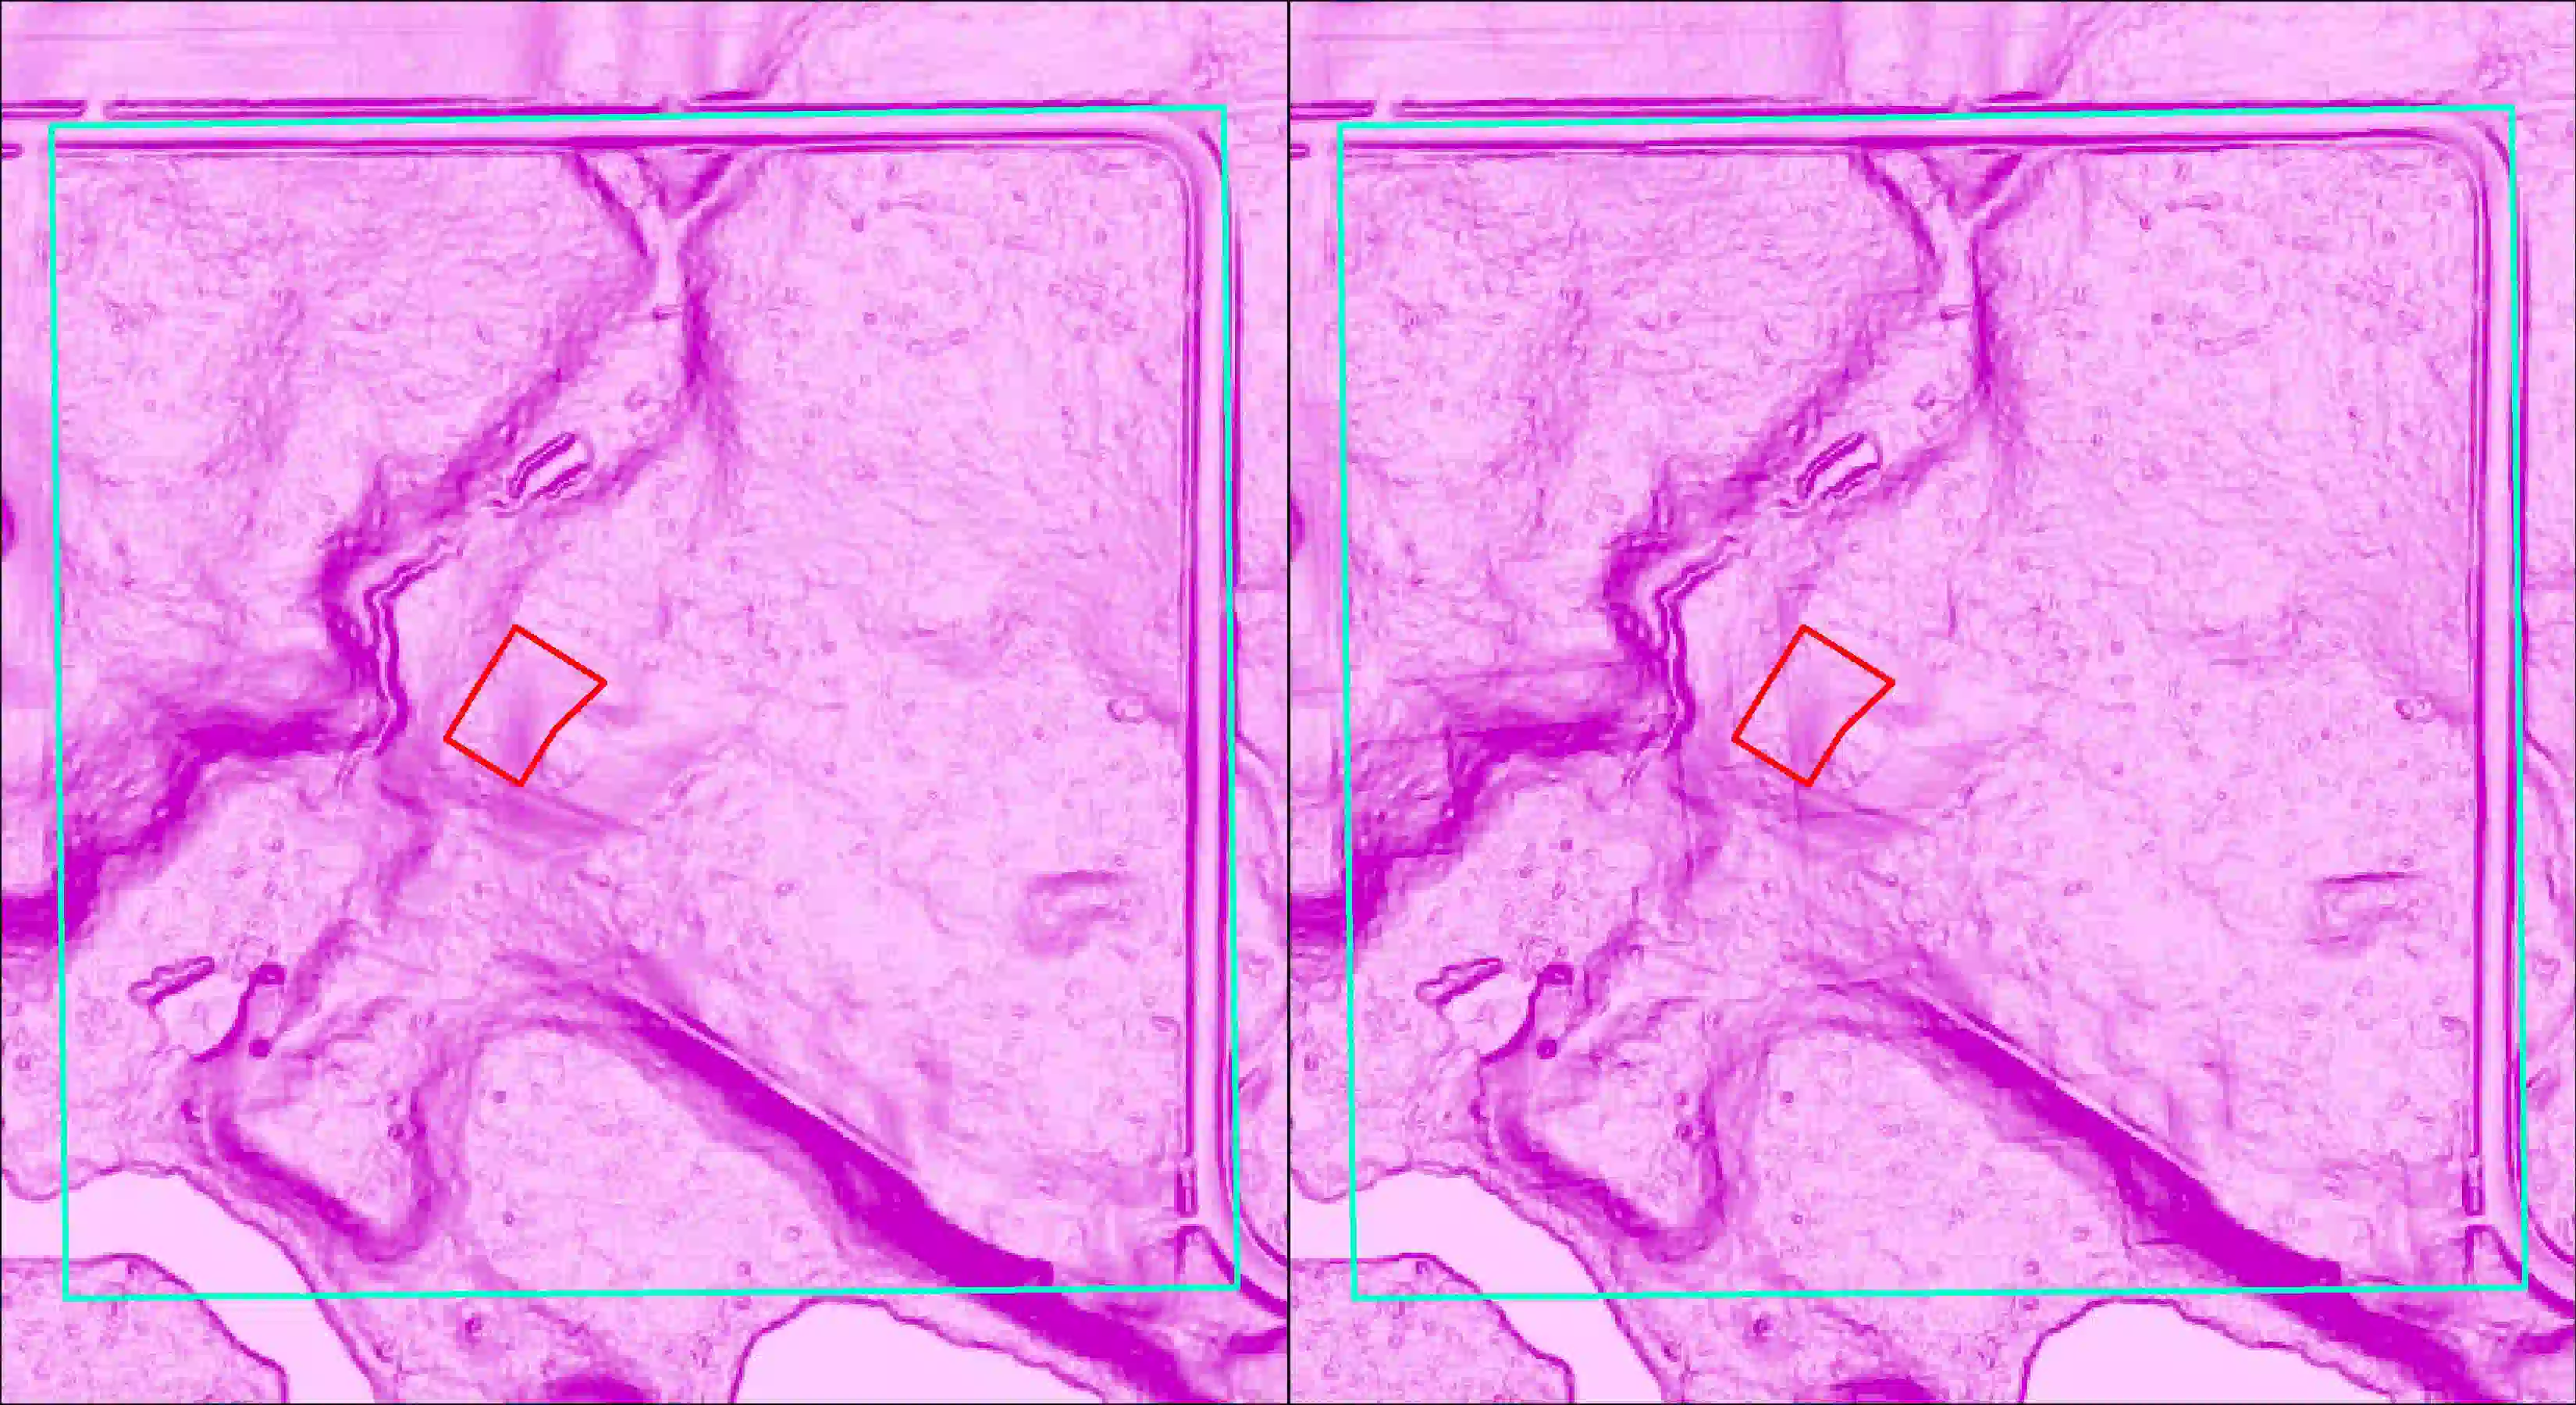 A side-by-side comparison of two slope rasters derived from different resampling techniques. Steeper slopes are darker pint and flatter slopes lighter pink. Property boundary in turquoise outline and orchard in red outline.